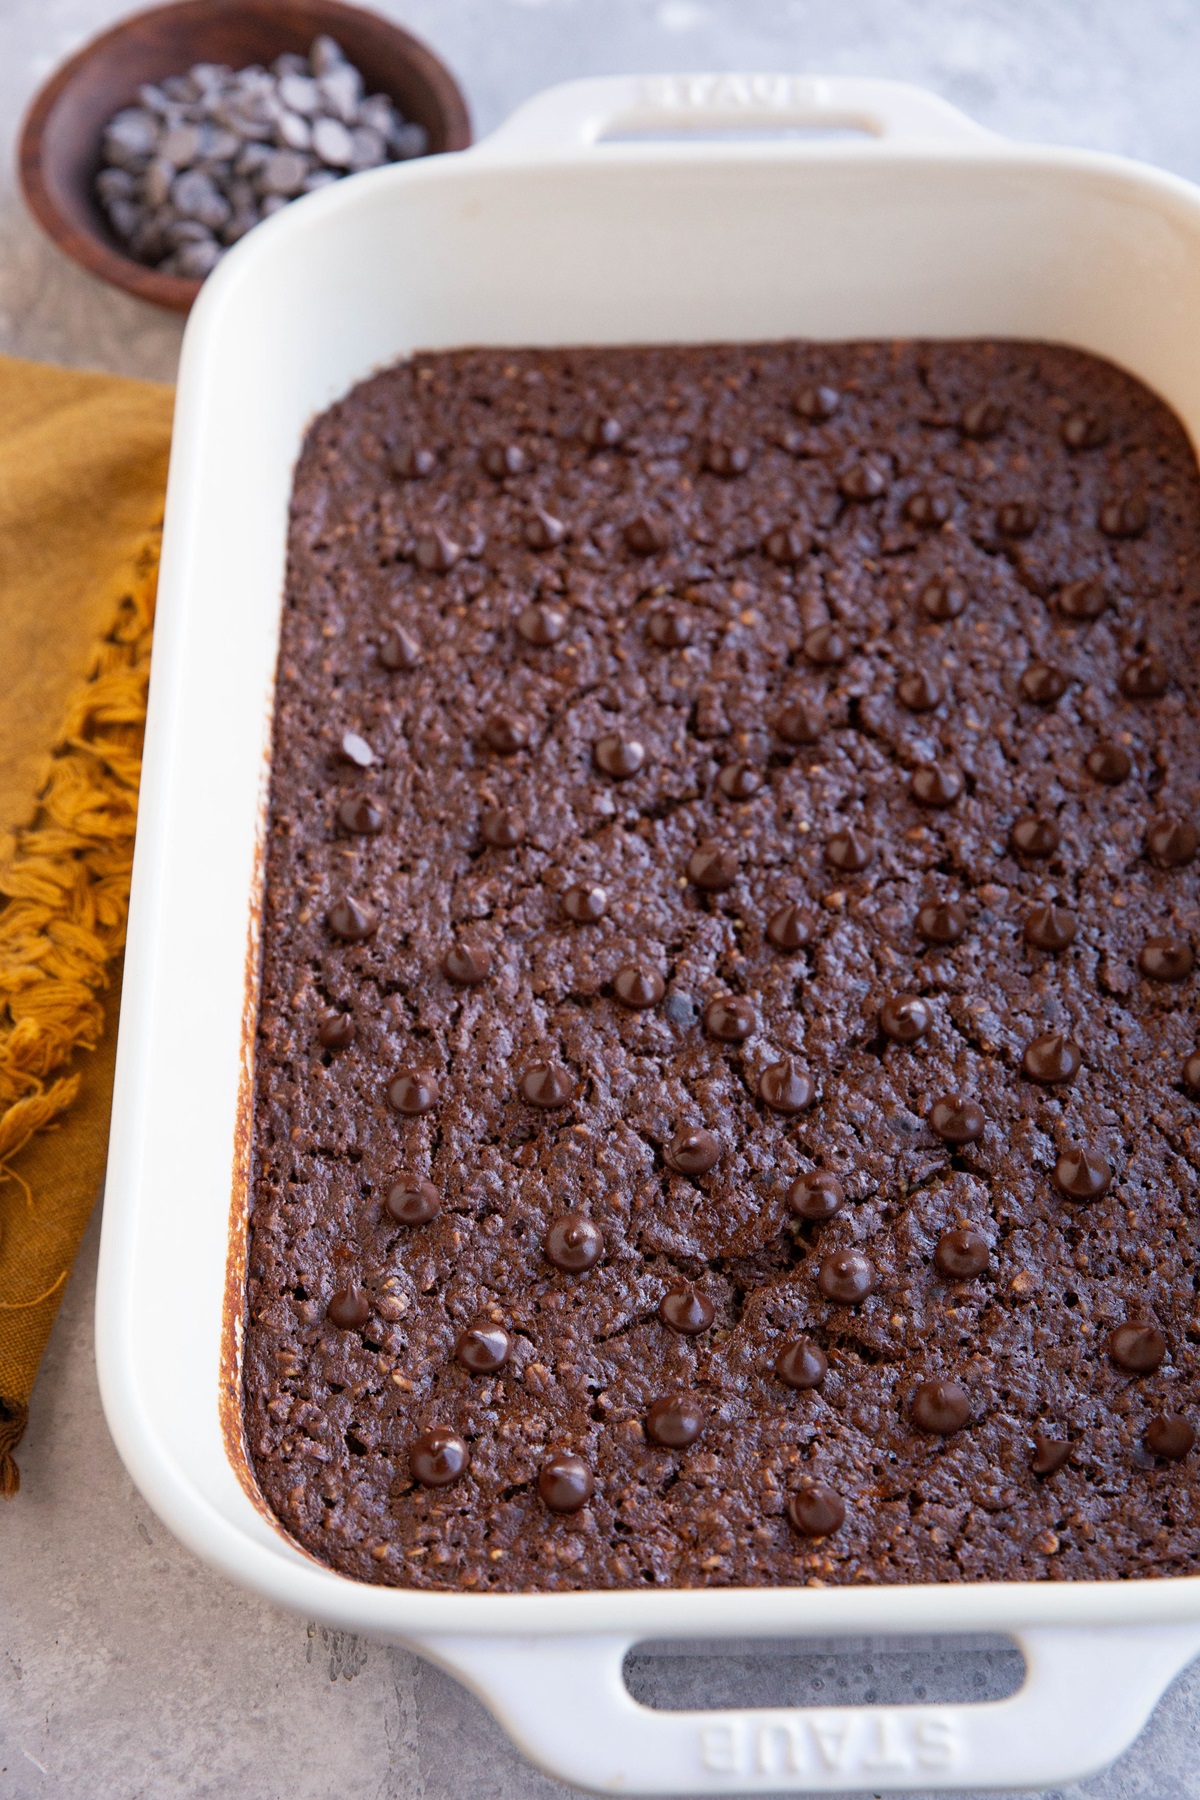 Baking dish with chocolate protein oats, fresh out of the oven.